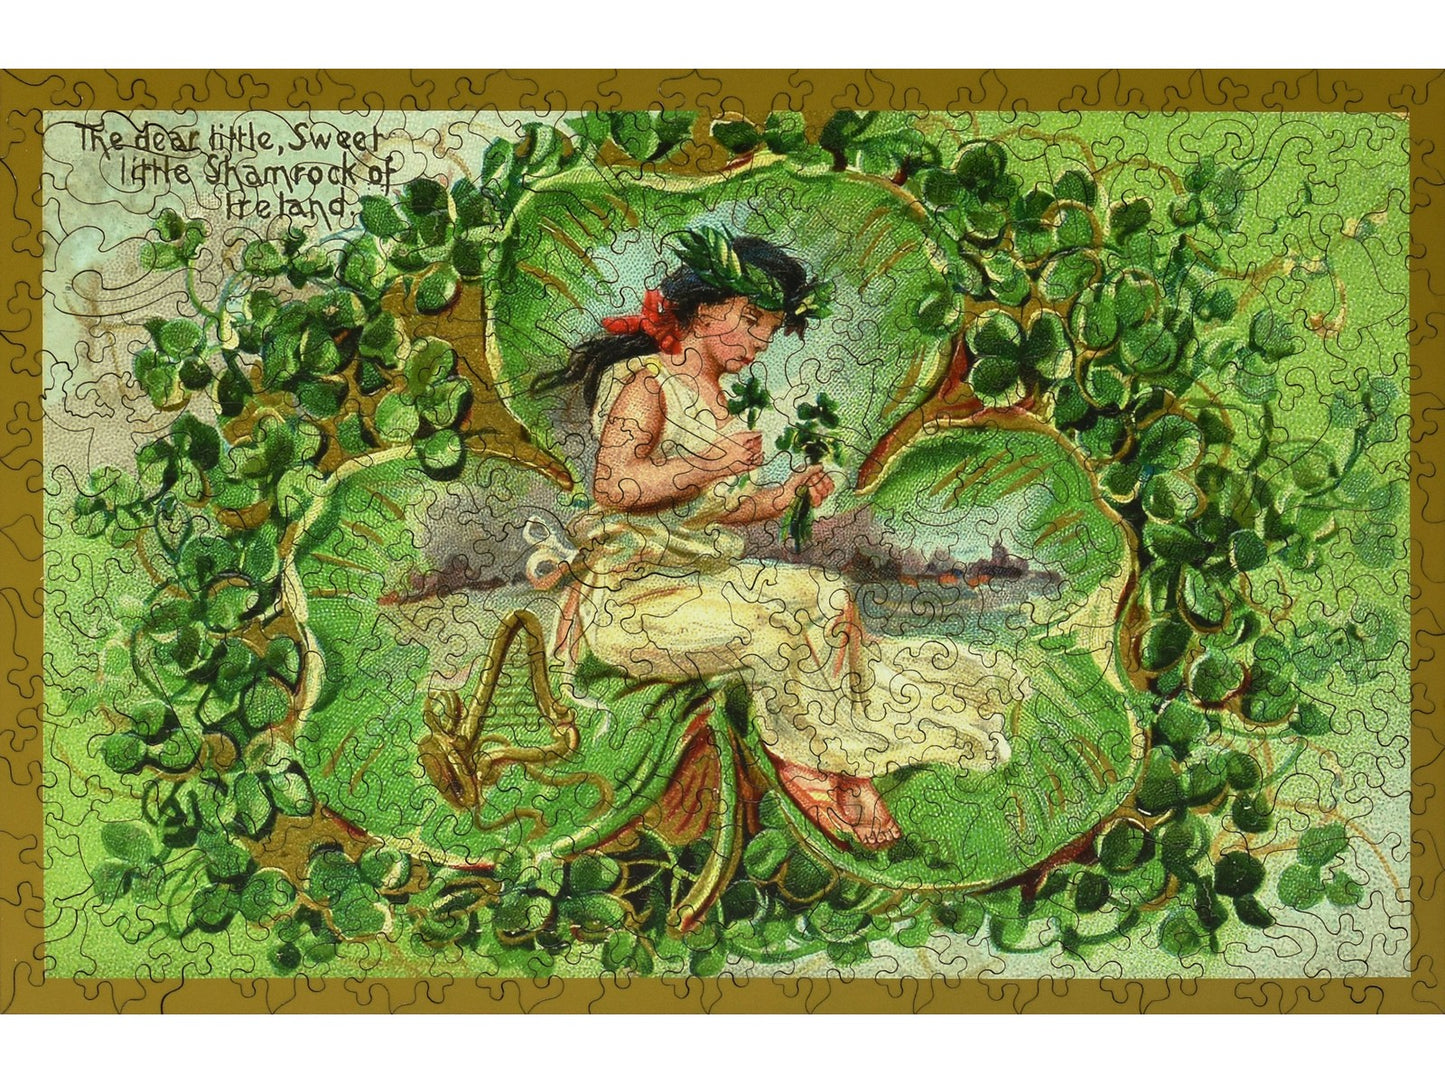 The front of the puzzle, Shamrock of Ireland, which shows a girl holding some shamrocks, surrounded by a decorative shamrock border.